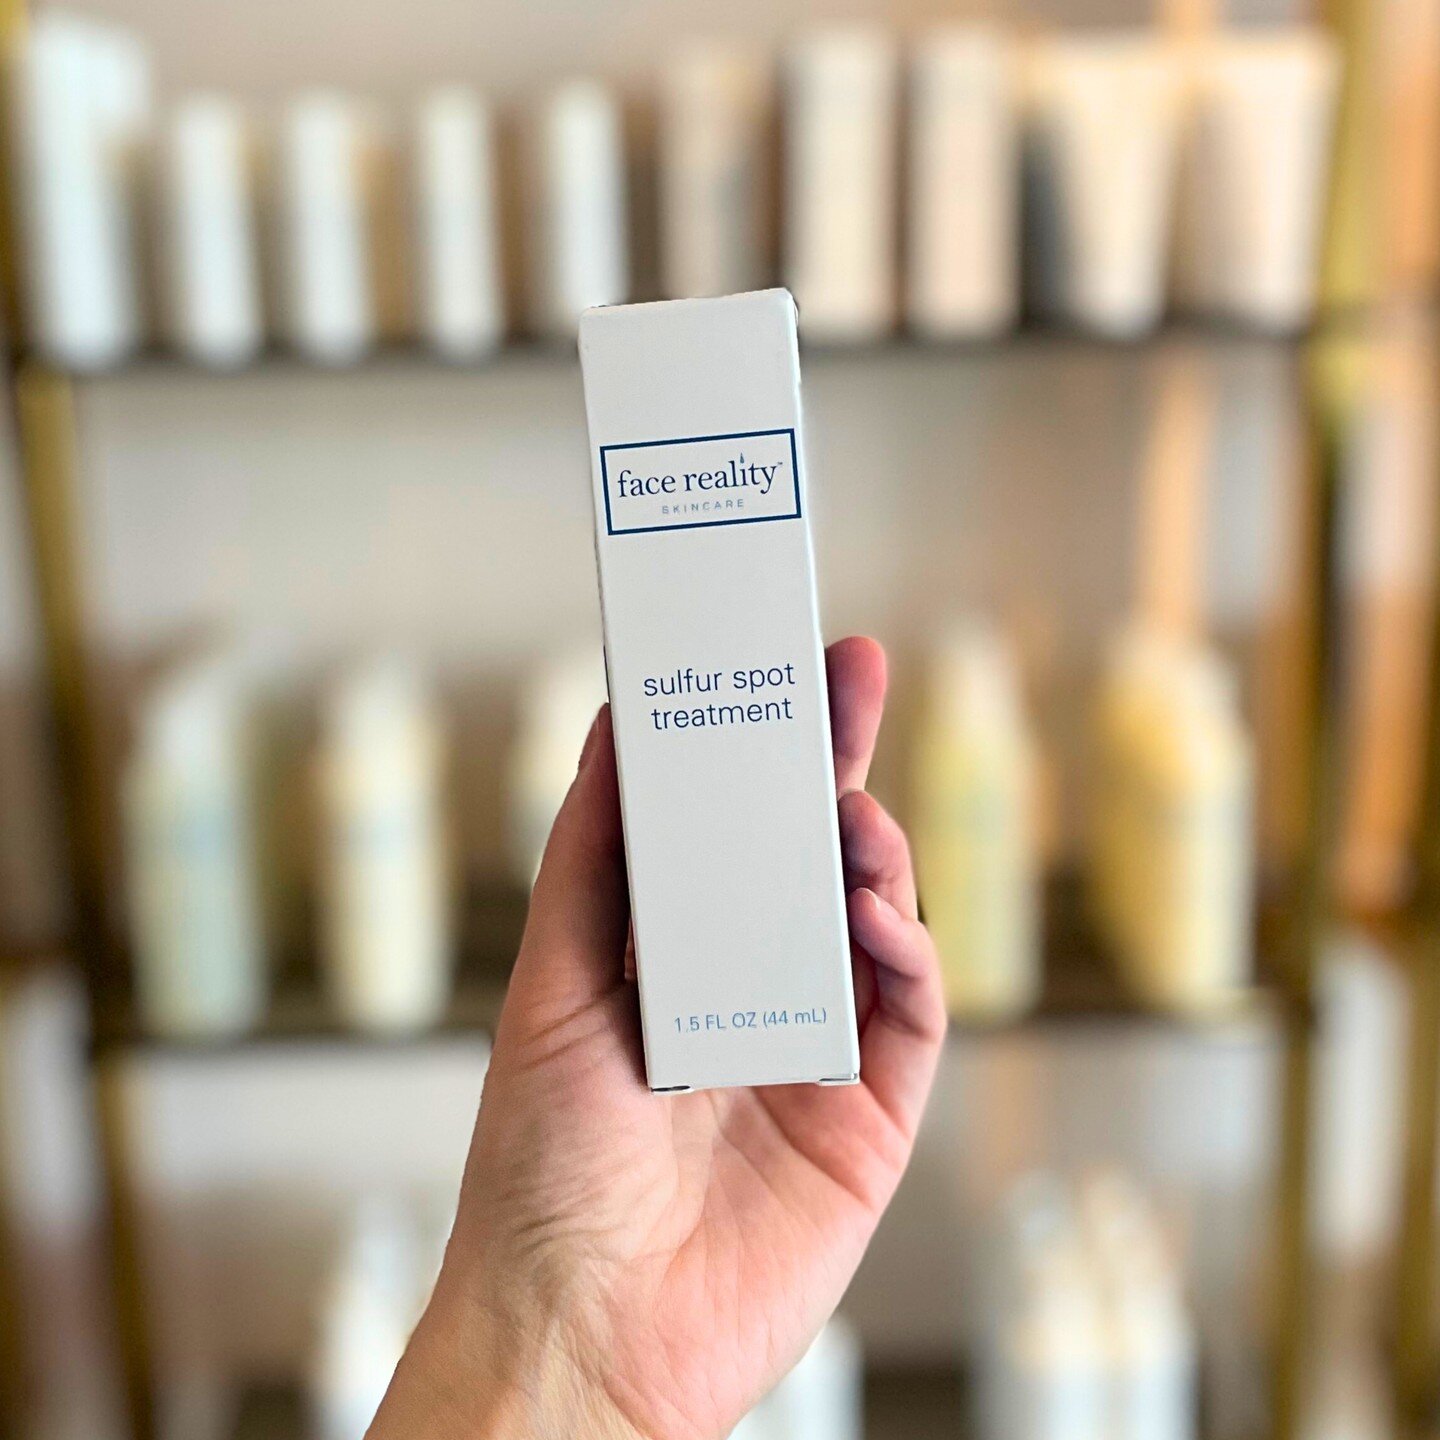 Let's talk SULFUR!

When browsing skincare, sulfur probably isn't one of the ingredients at the top of your list to look for - but maybe it should be!

@facerealityskincare 's Sulfur Spot Treatment is a great way to dip your toe into sulfur-based ski